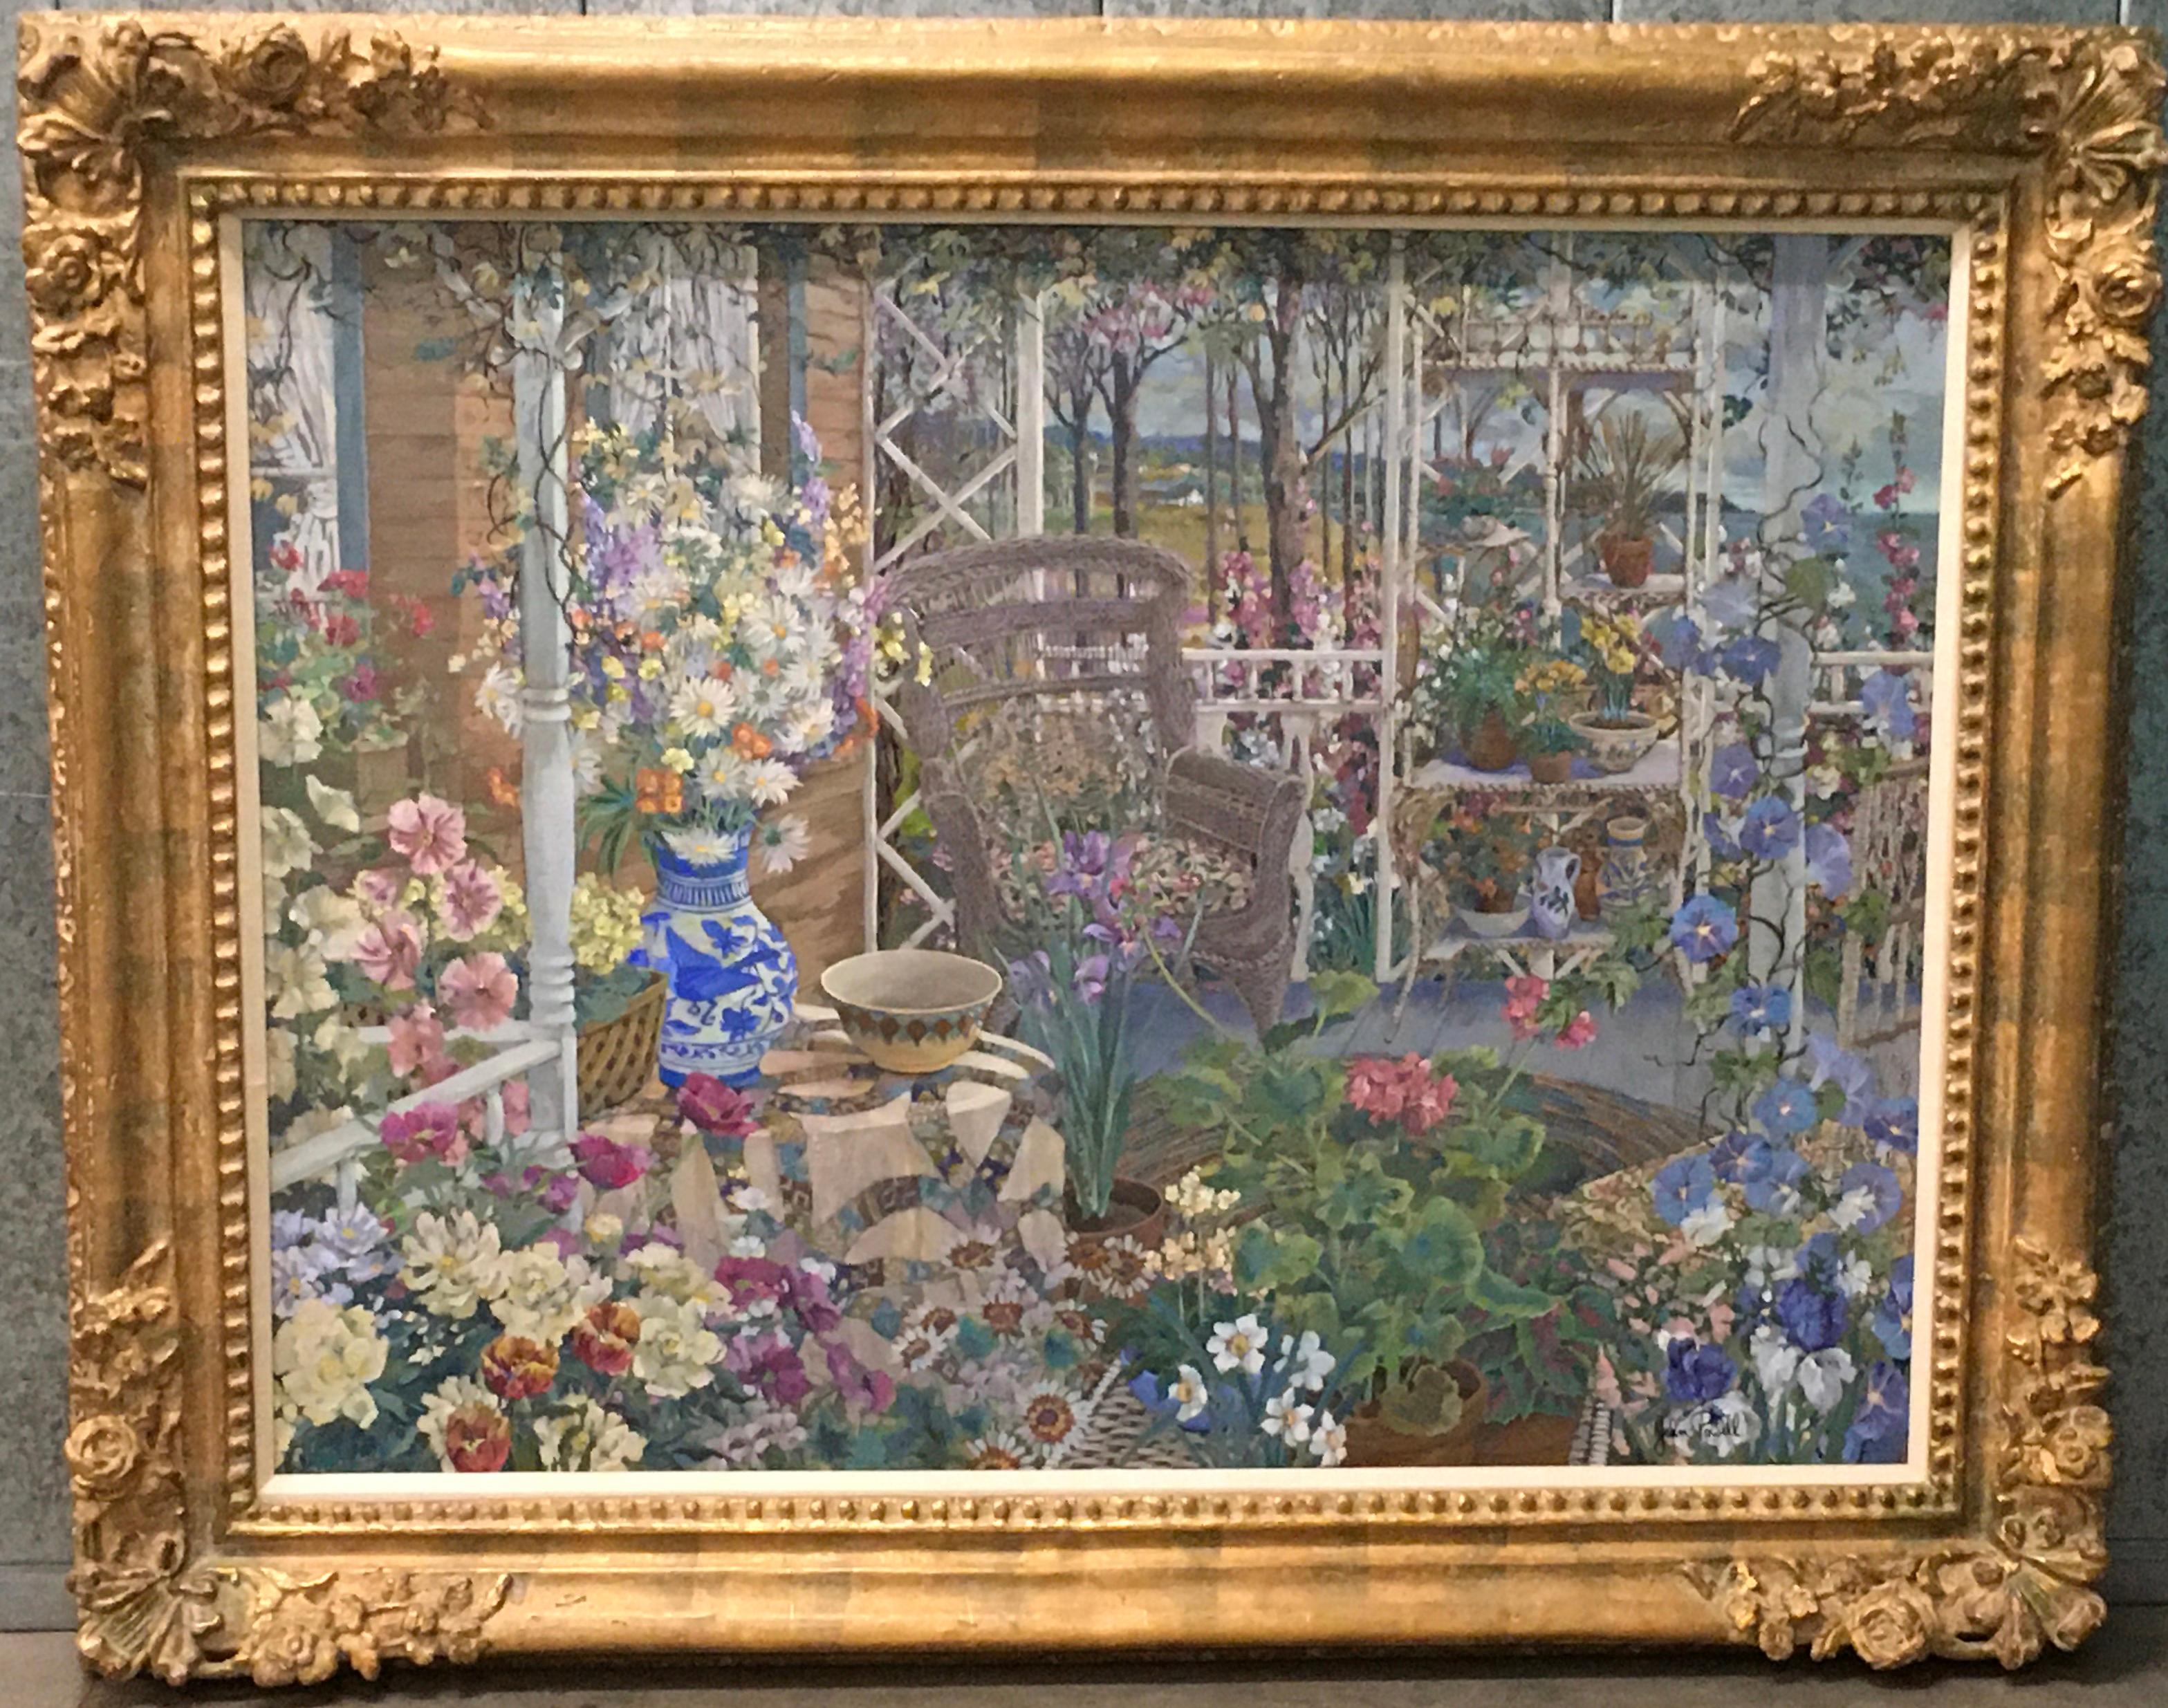 Down East Veranda - Colorful Flowers & Oriental Vase with Maine Landscape - Painting by John Powell